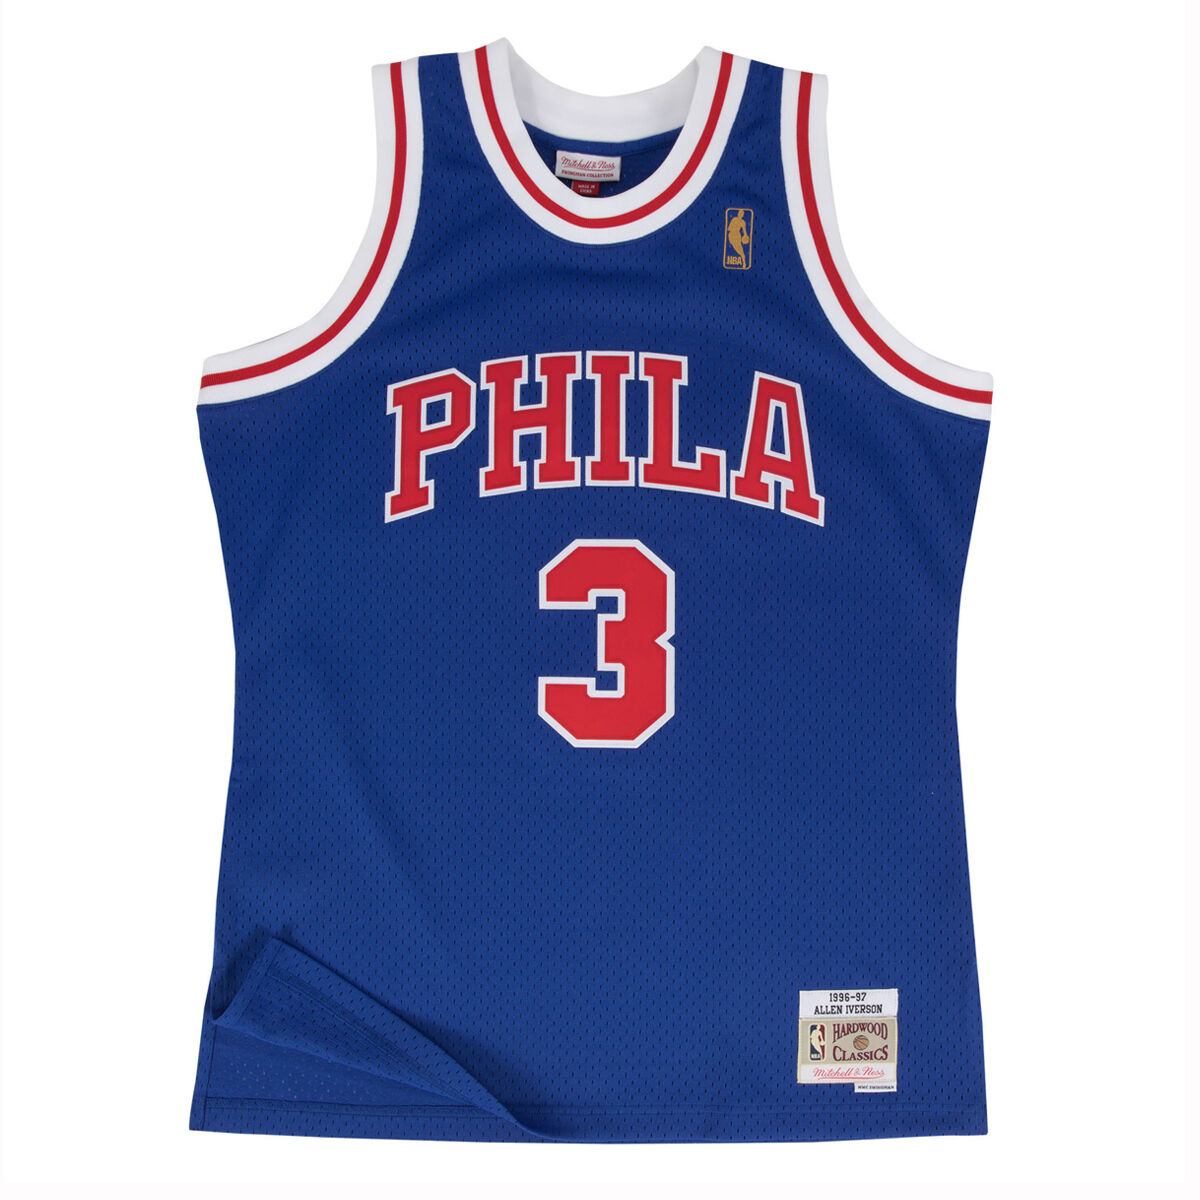 philly basketball jersey